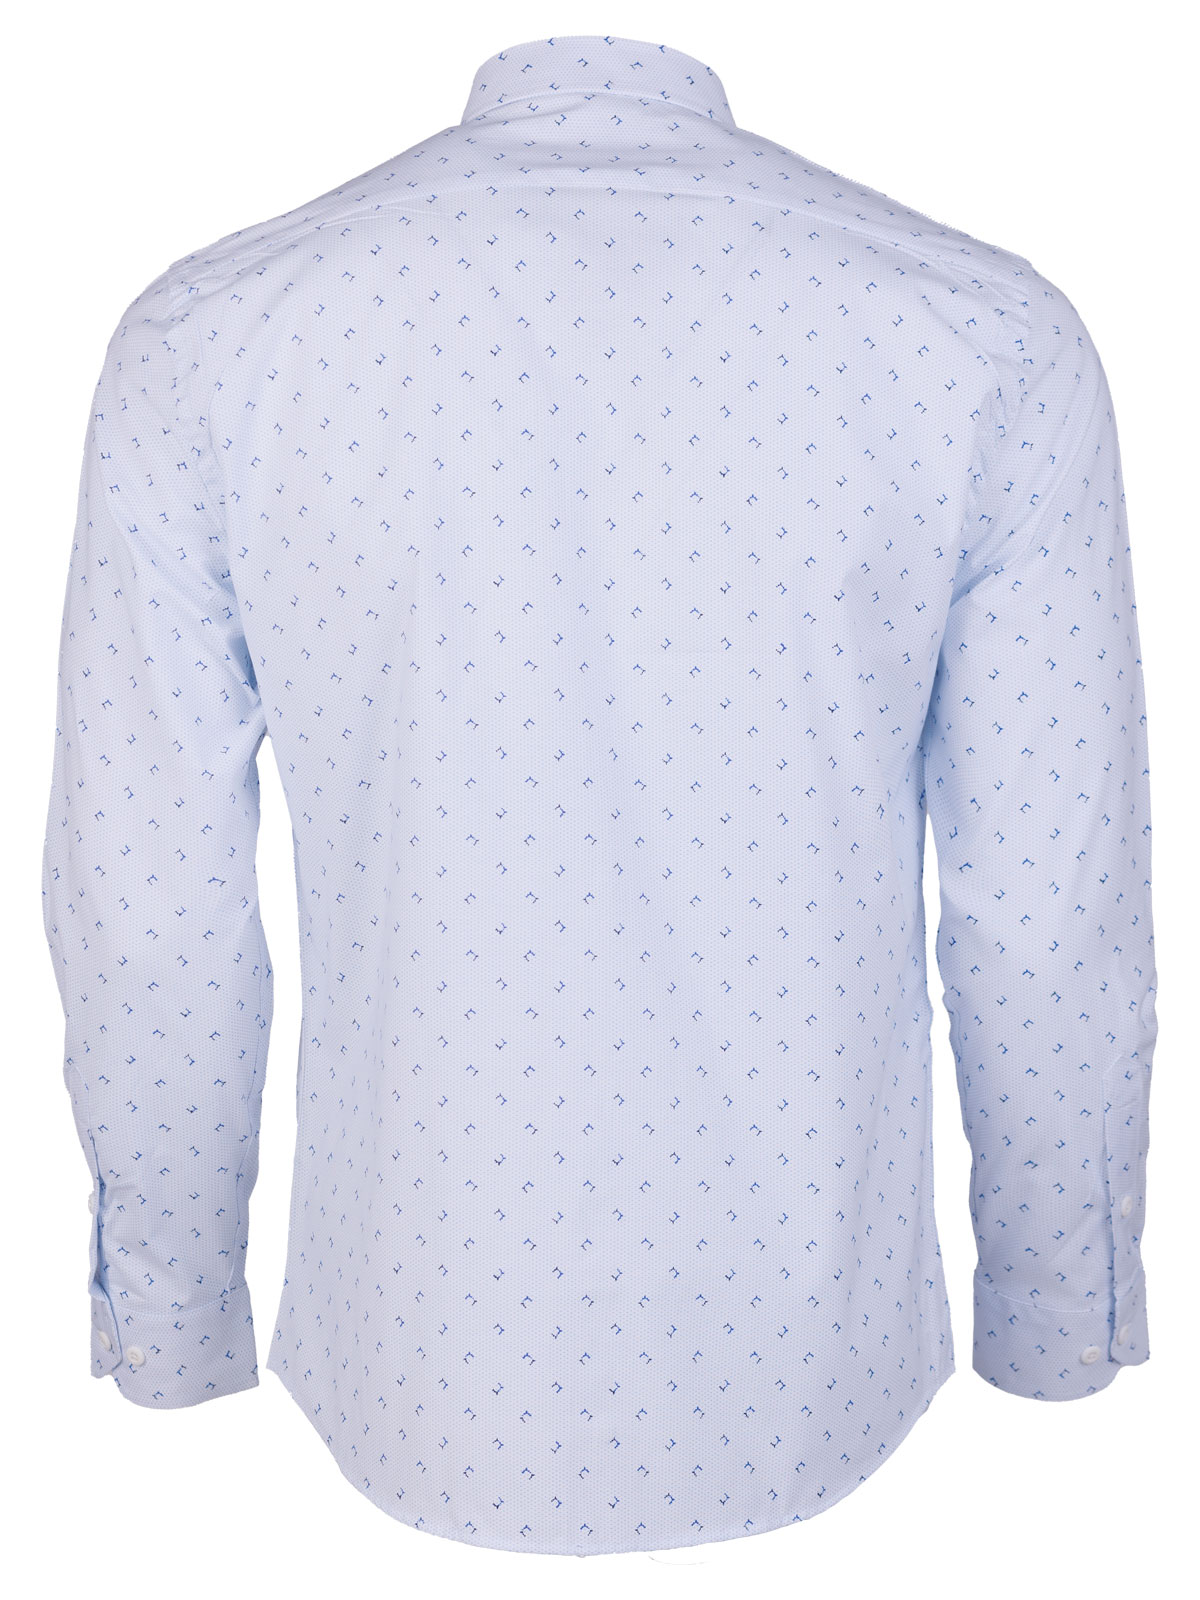 White shirt with blue dots max - 21602 € 44.43 img2